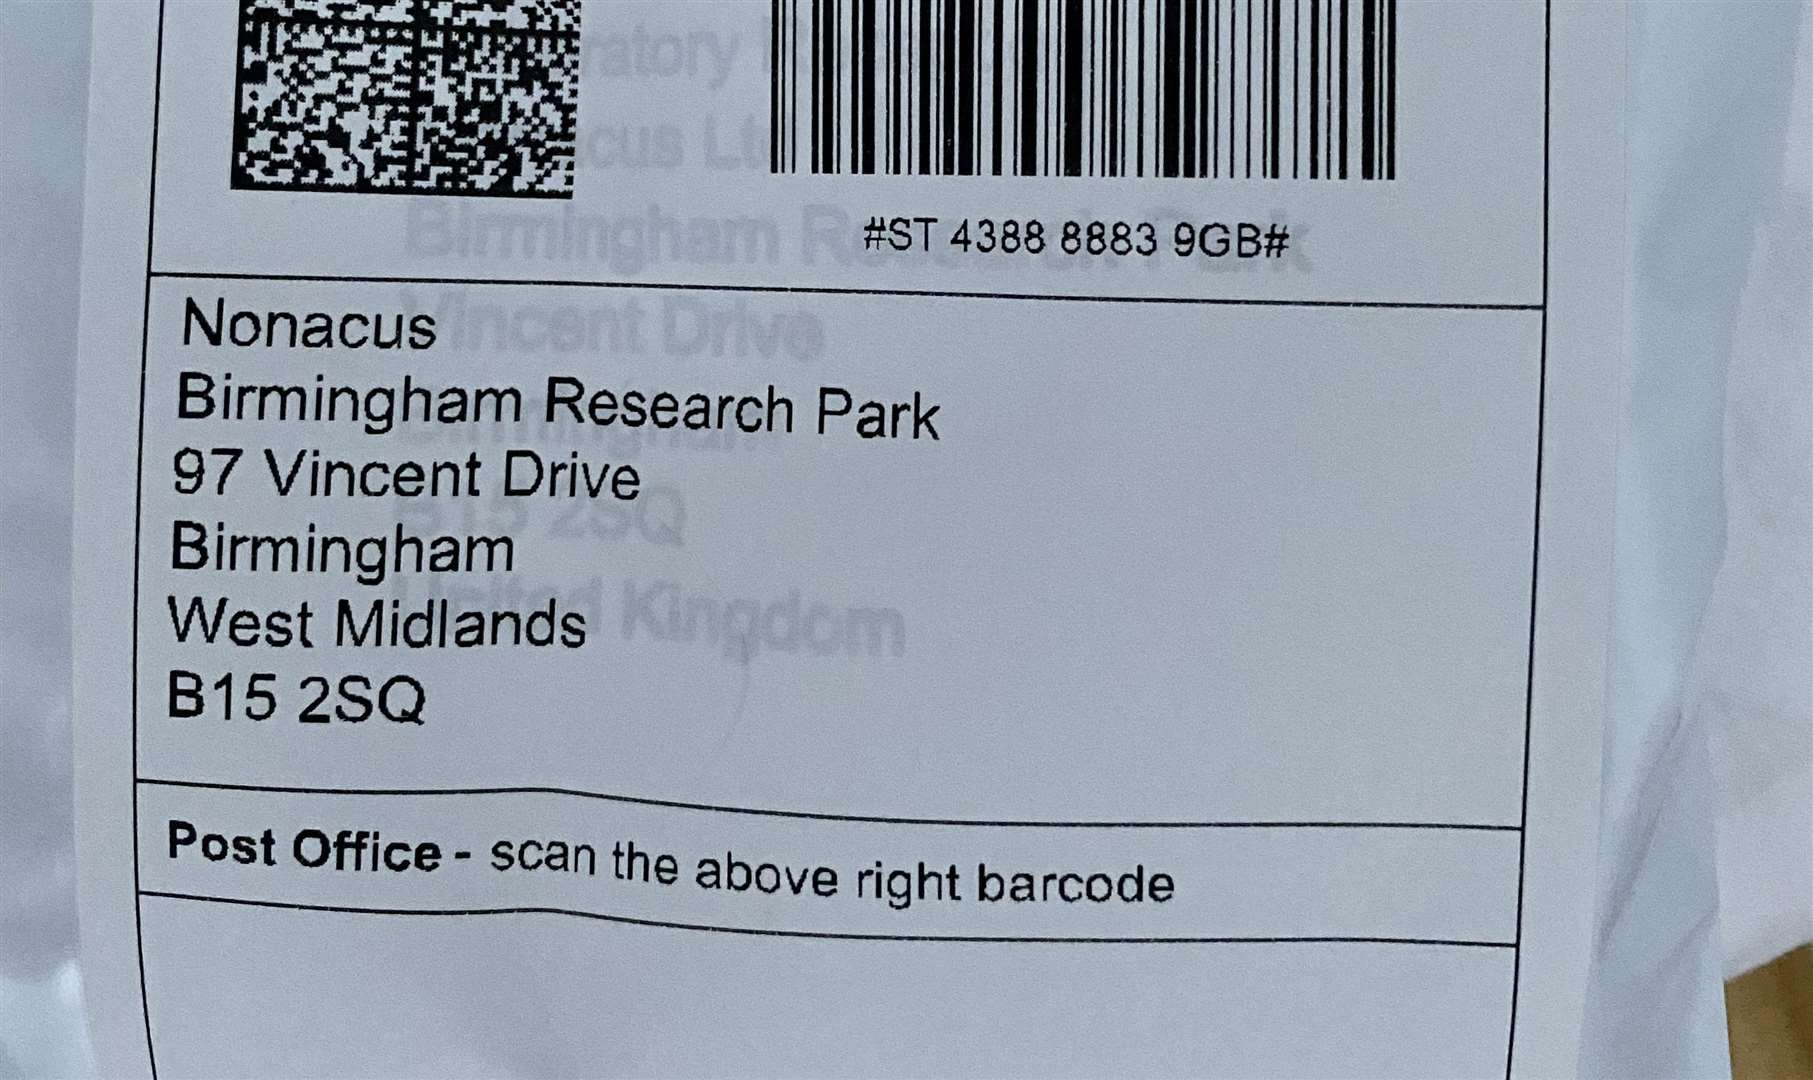 Even though the test provider was based in Brighton, the lab was in Birmingham.